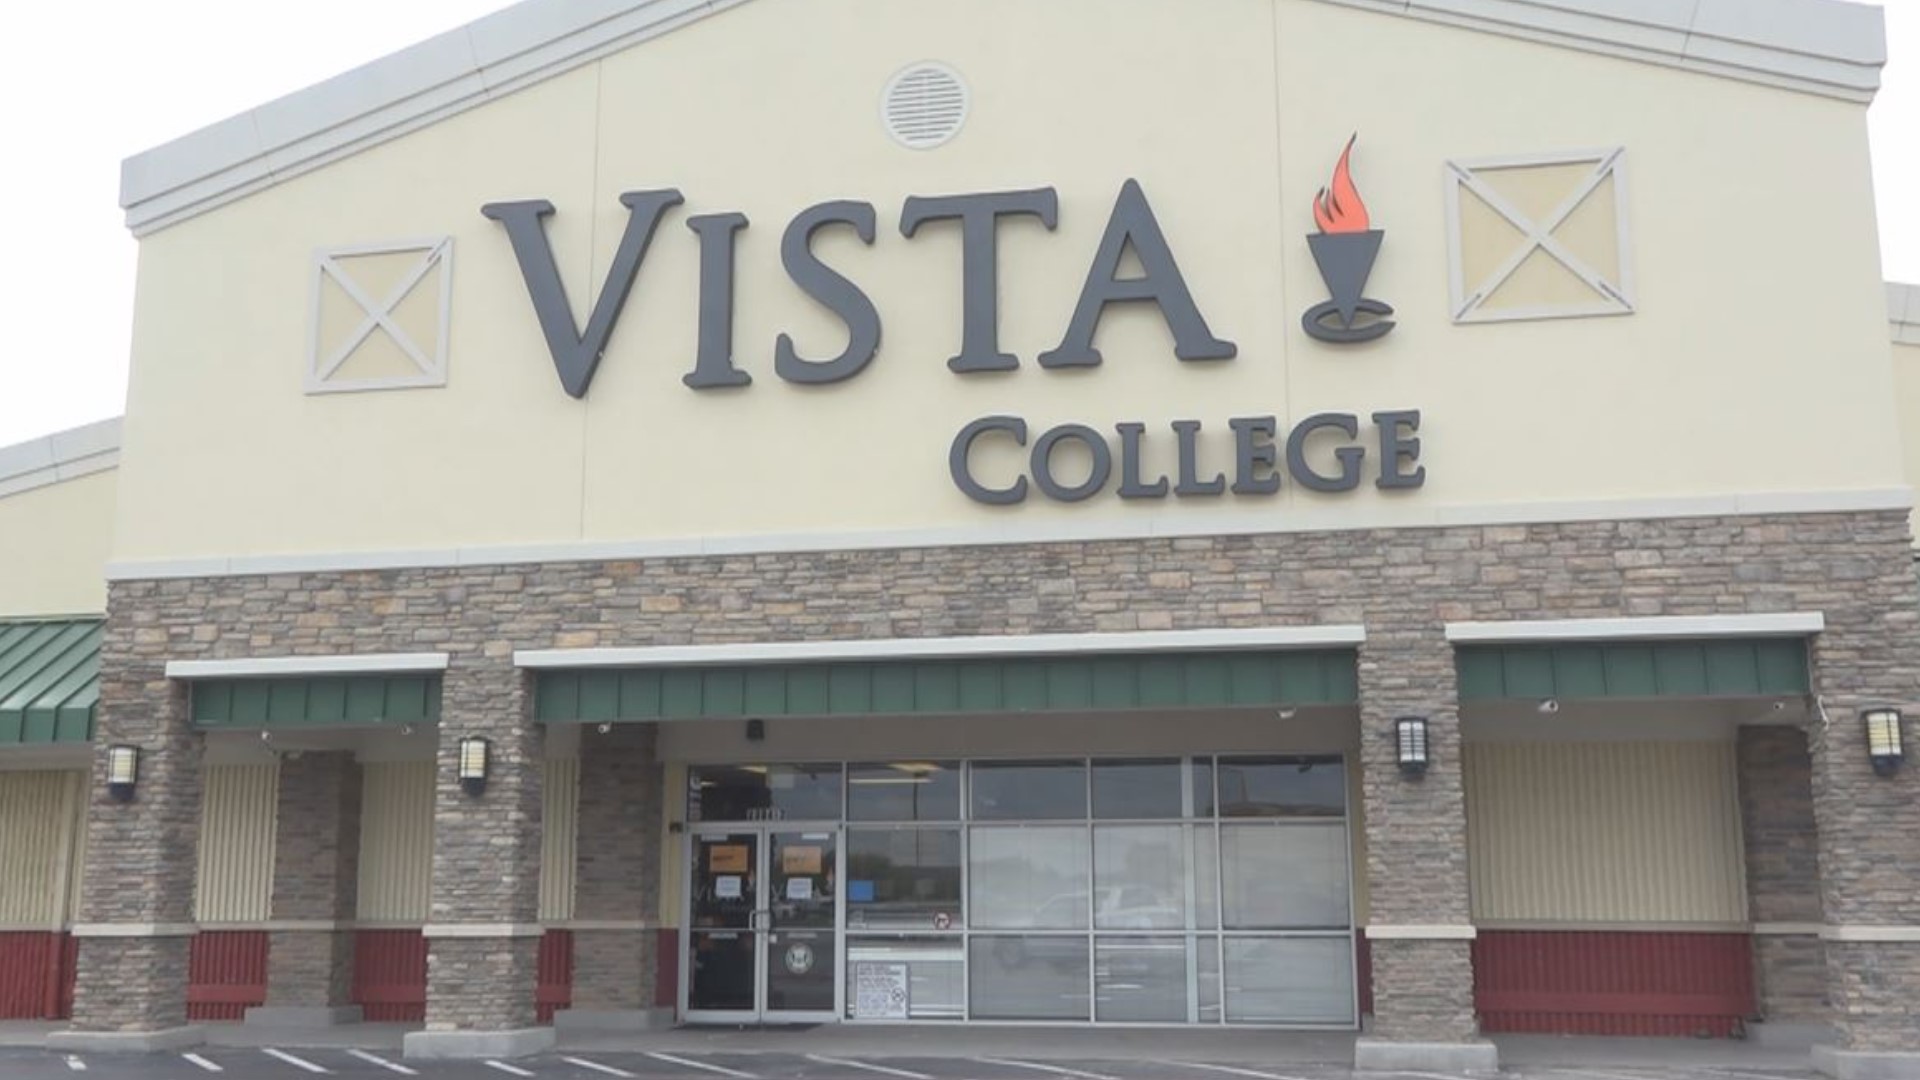 CTC said it had already been working on an onboarding program for Vista College students for weeks.